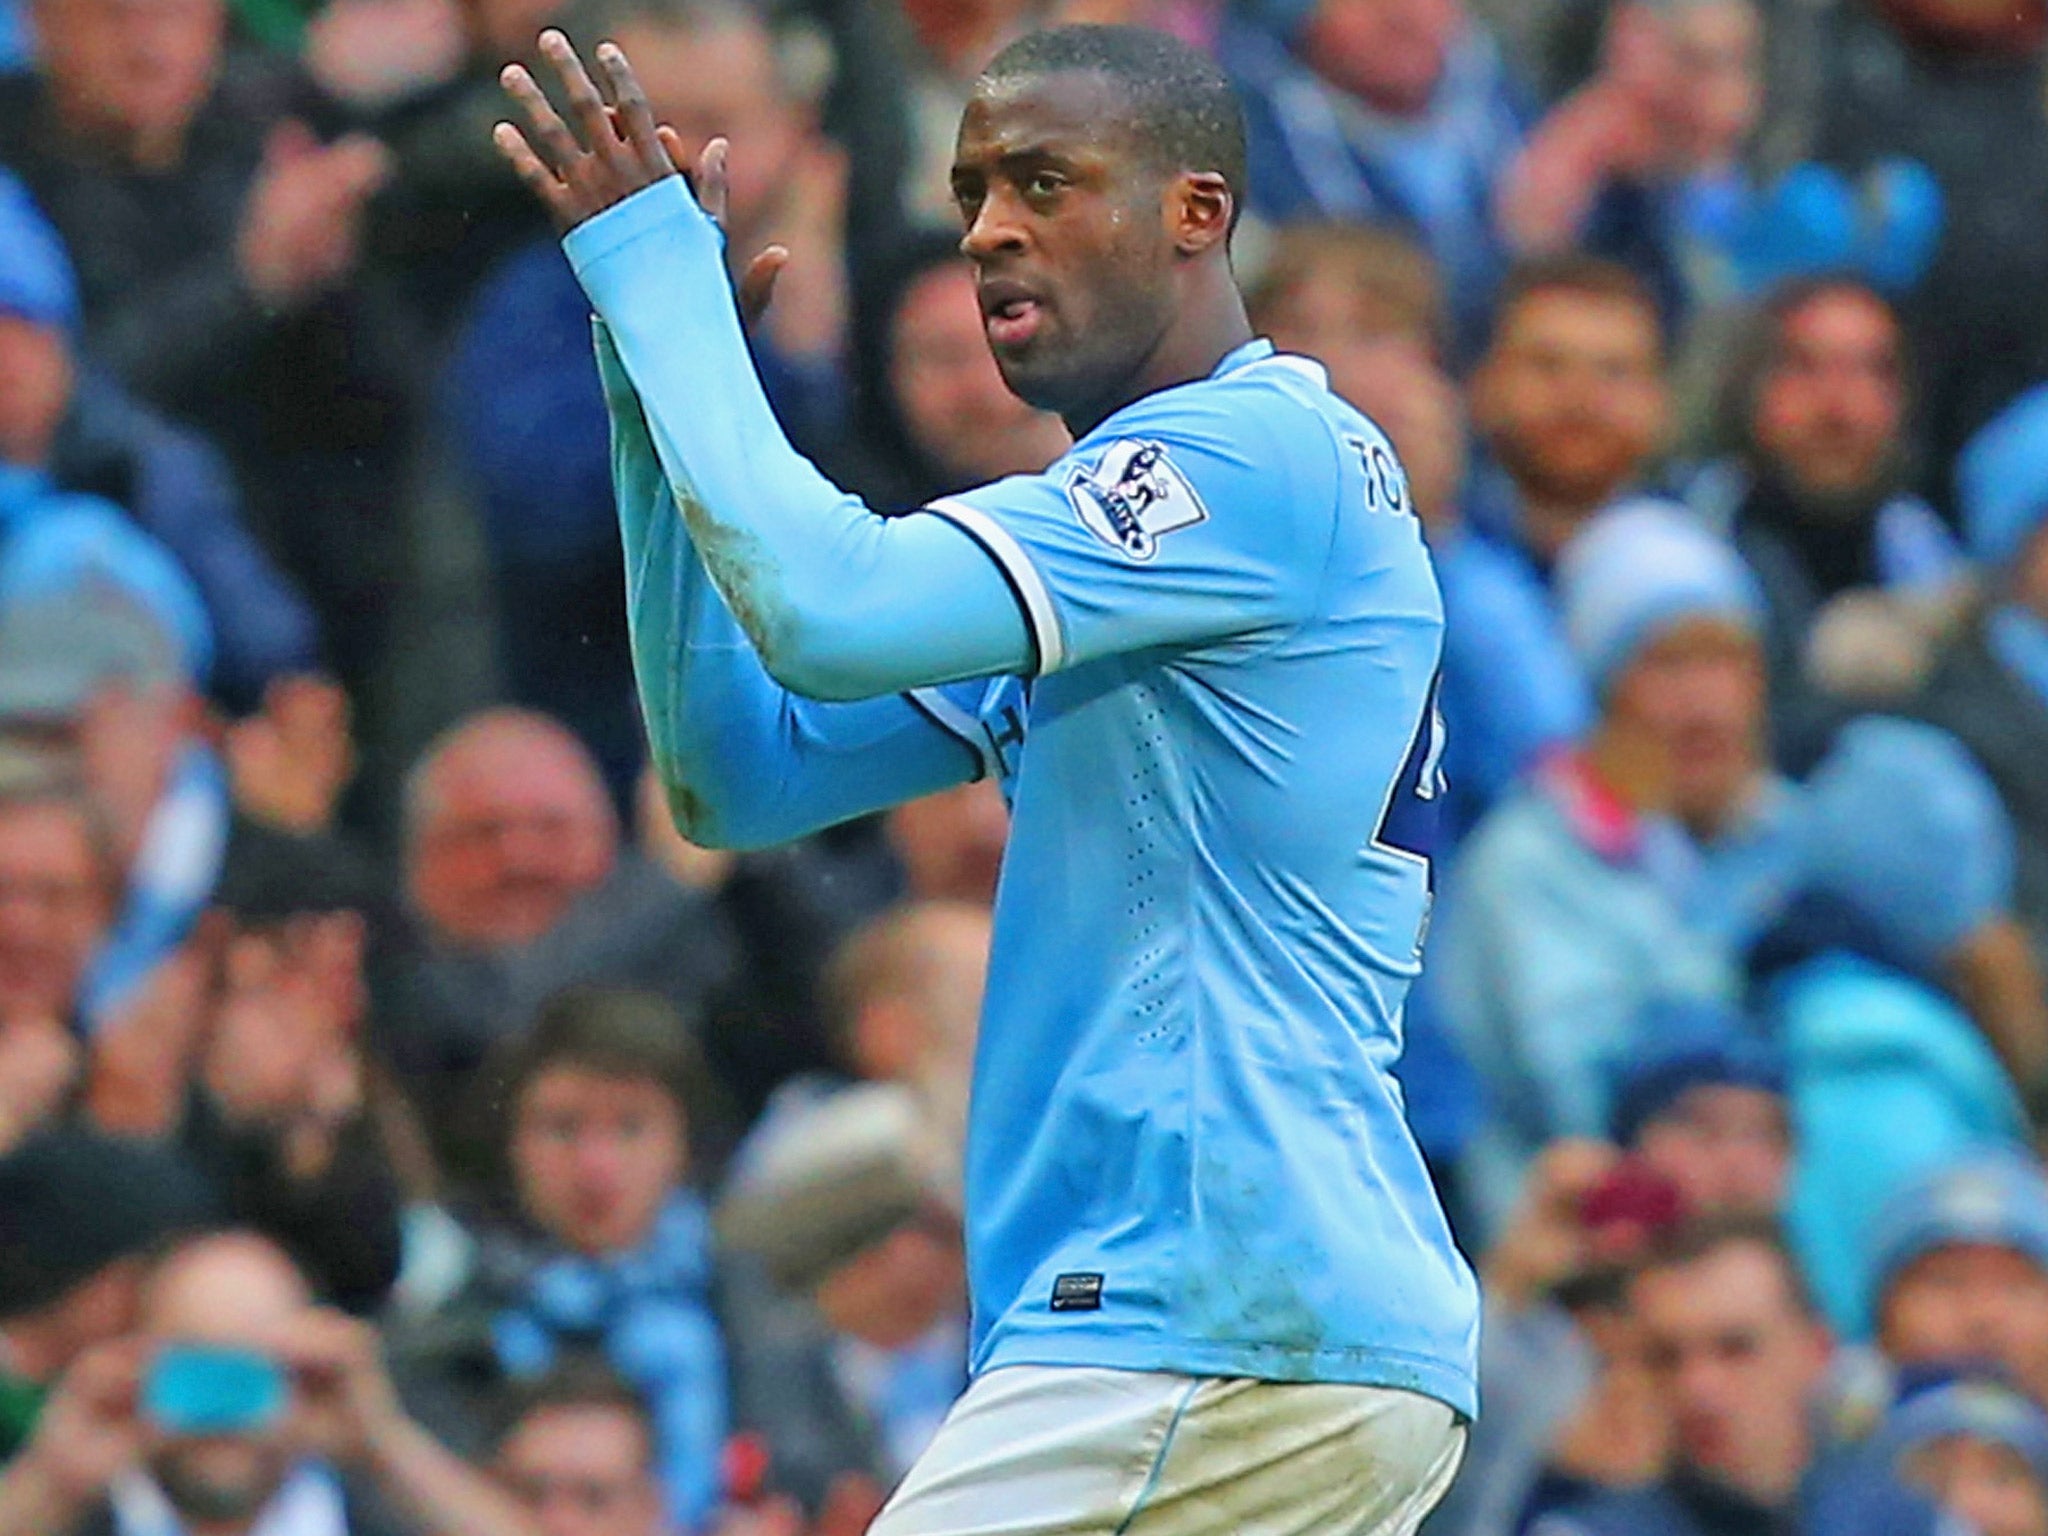 Manchester City claim Yaya Touré received a birthday cake, a Facebook post and had ‘Happy Birthday’ sung to him